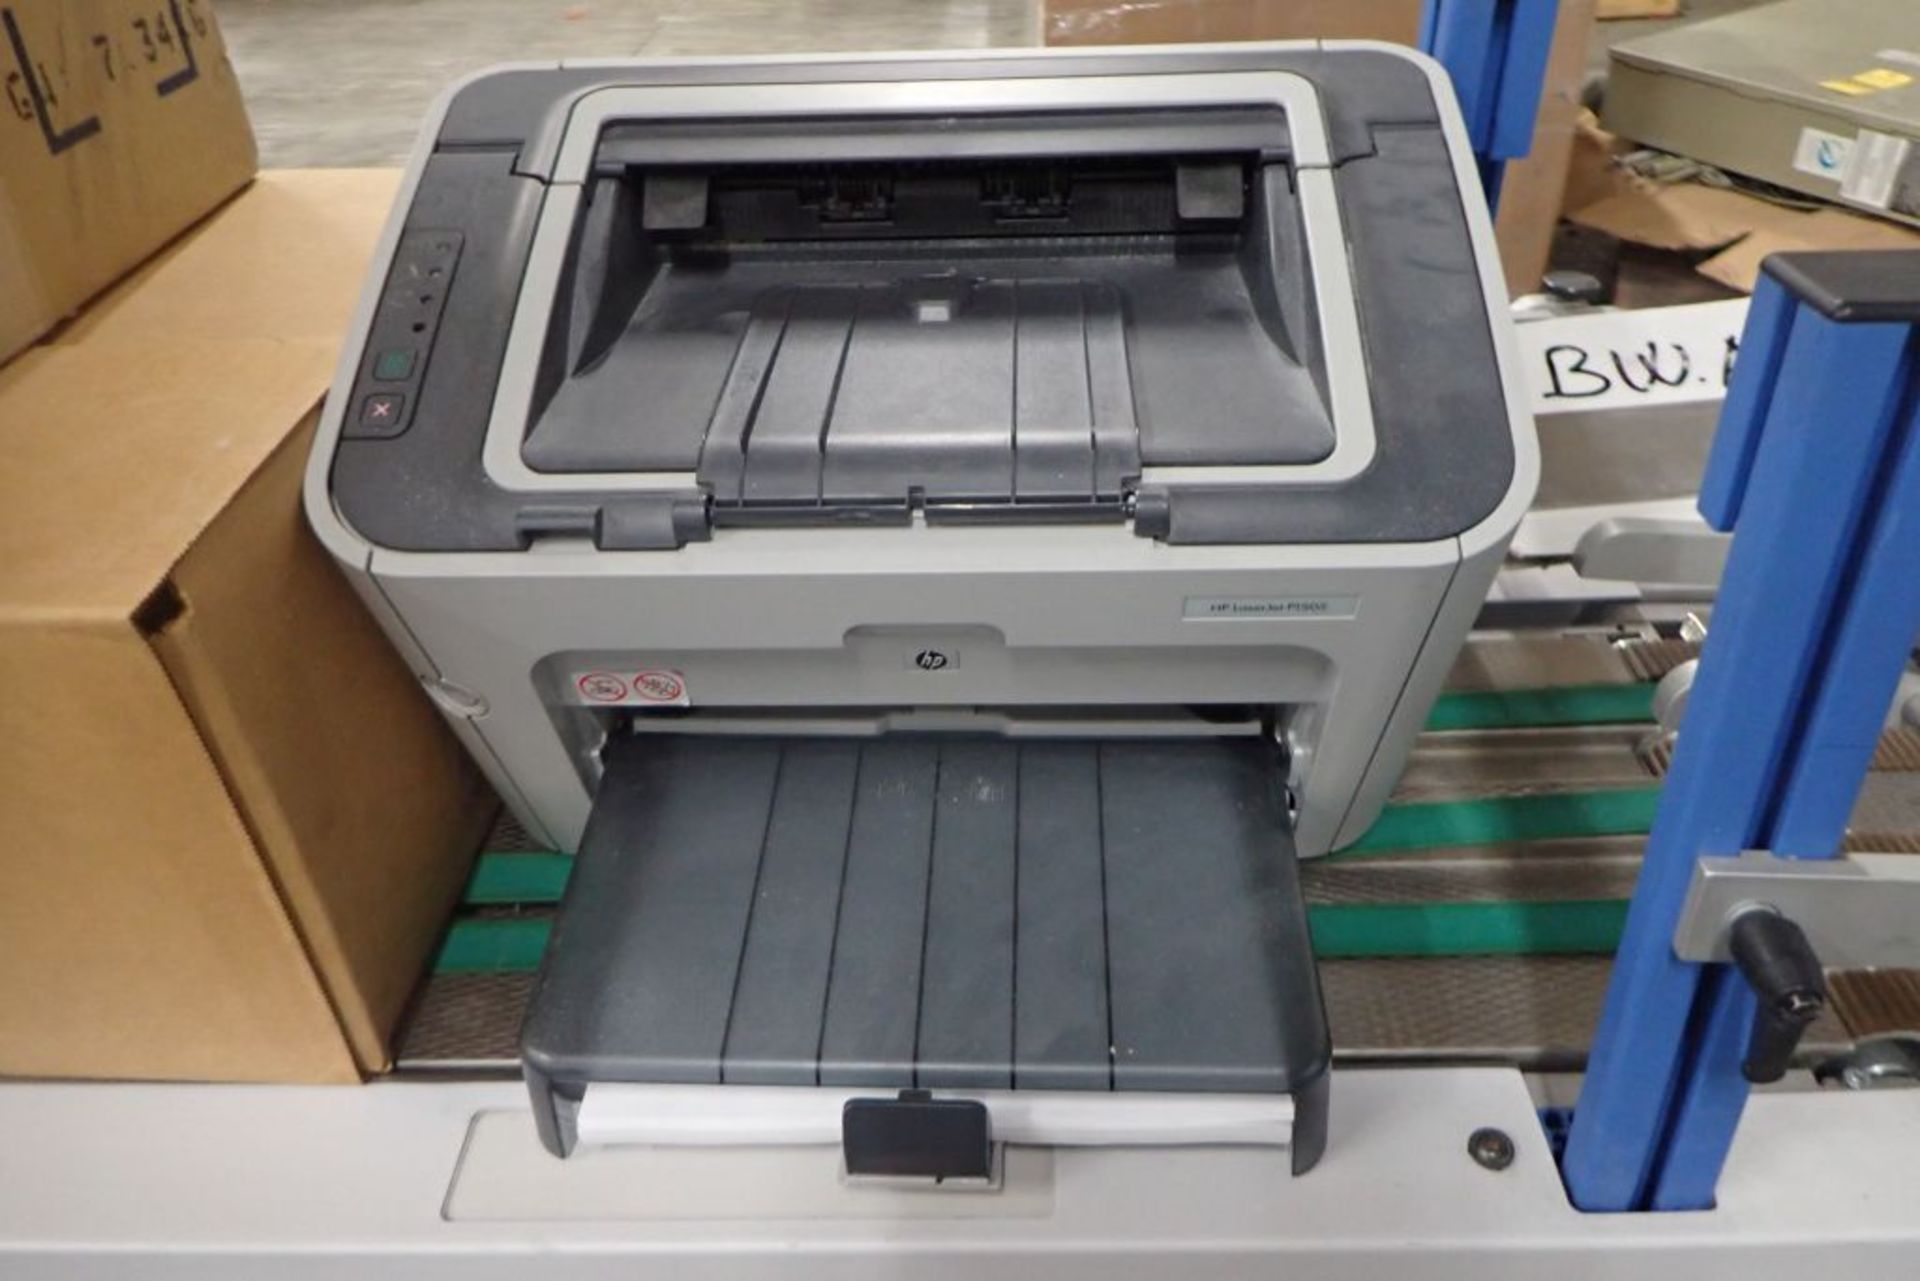 Bowe Systec Turbo Premium Automatic Mailing System - Image 155 of 297